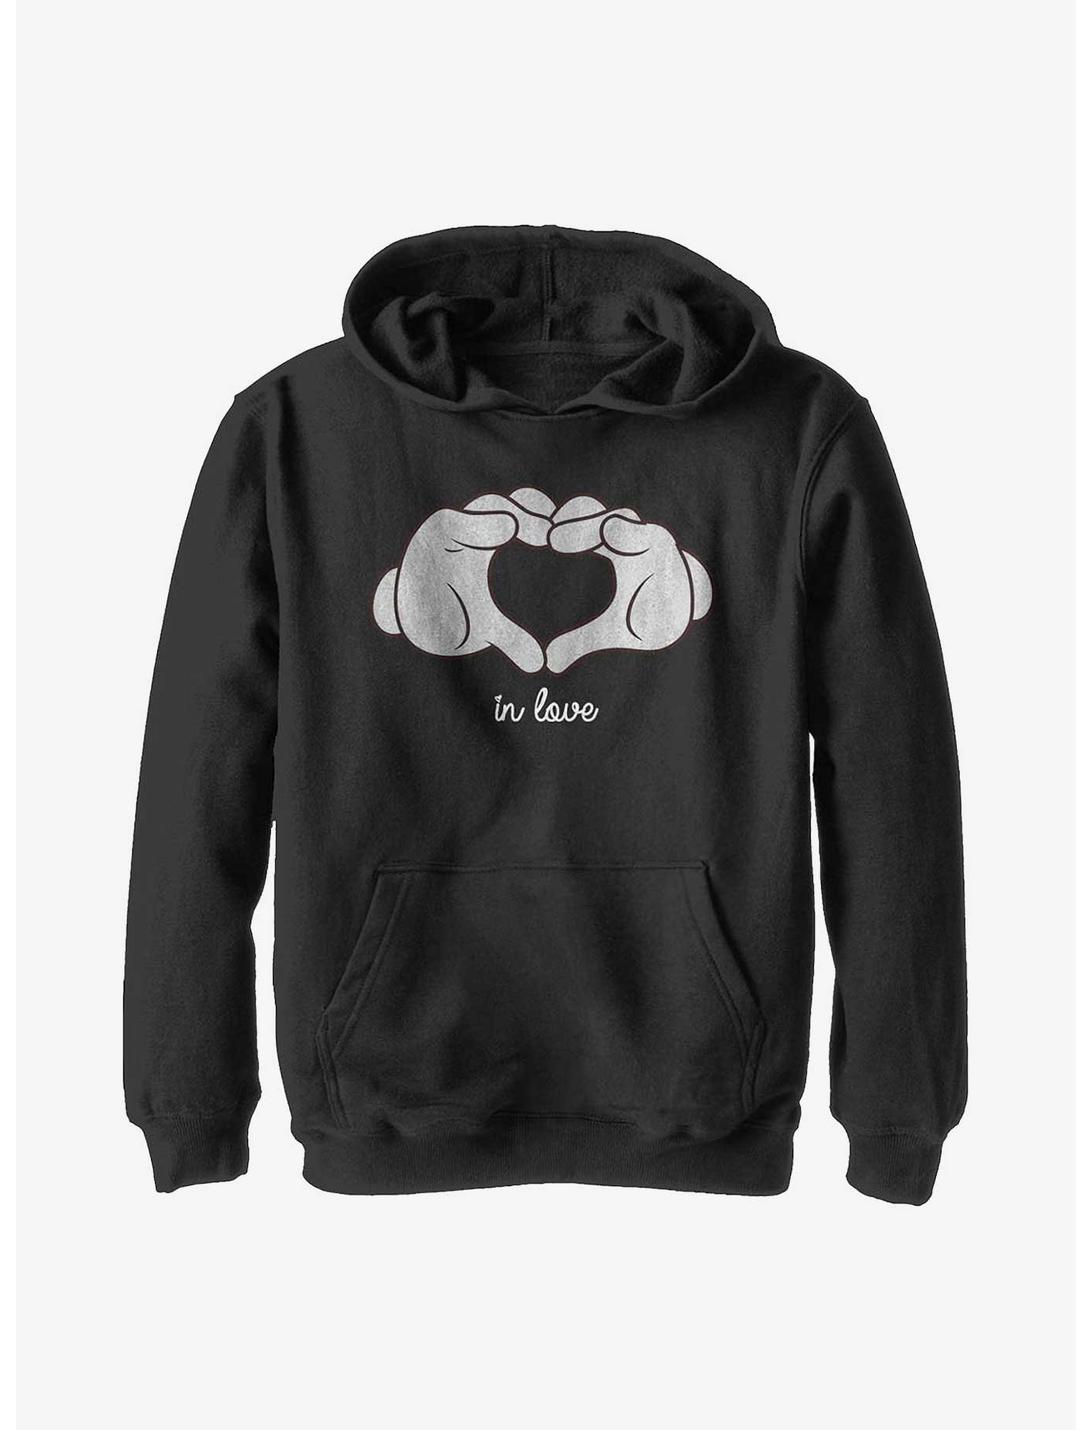 Disney Mickey Mouse Glove Heart Youth Hoodie, BLACK, hi-res